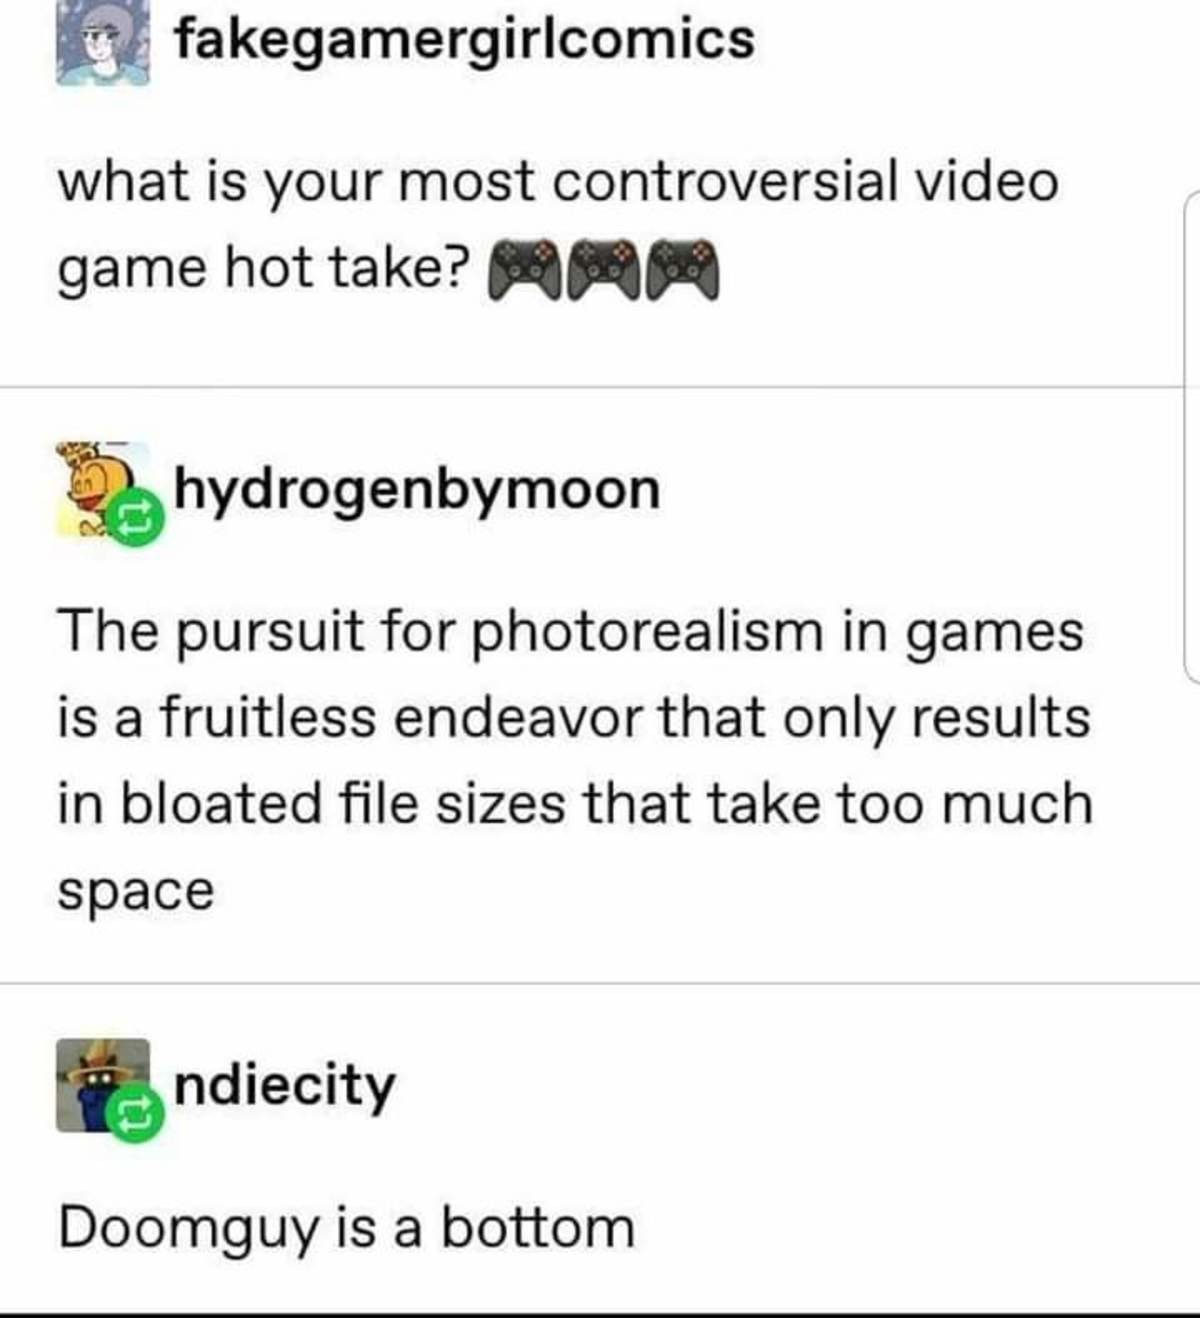 videogame hot takes. .. Fruitless may ass, some of the games coming out these days are absurdly pretty. Also doomguy doesnt have time for sex. If he did, he'd rip and tear holes and do